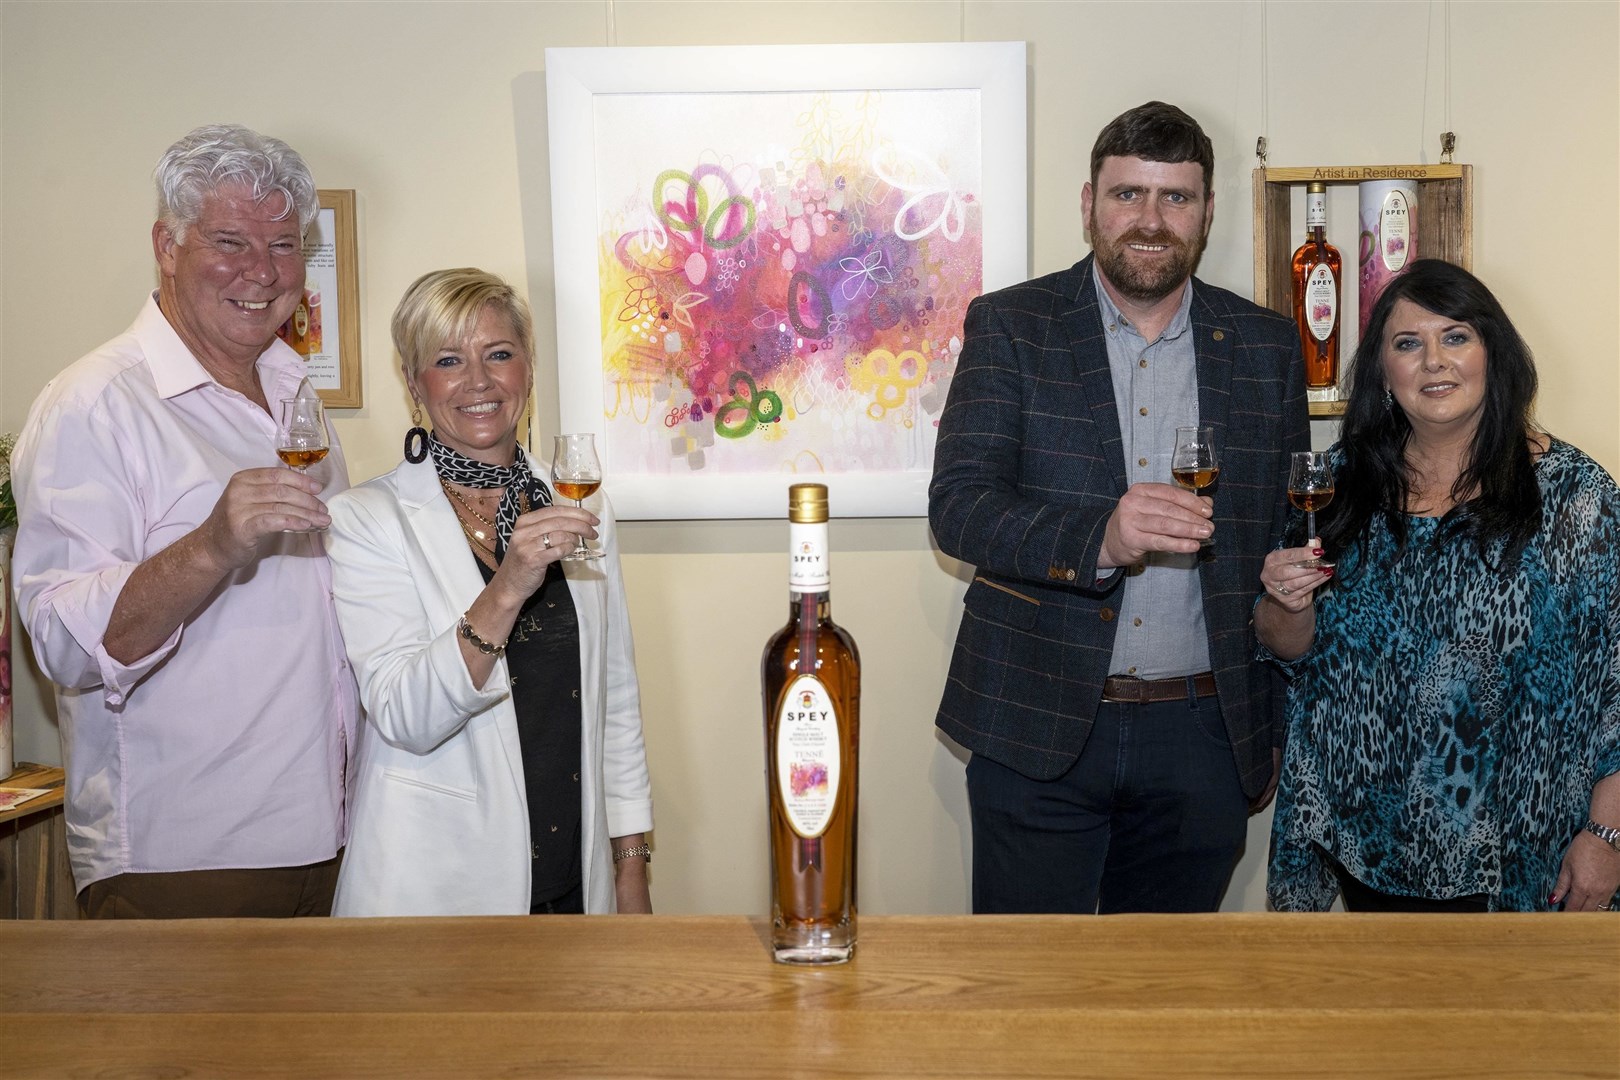 Speyside’s Artist Trio was launched with an exhibition and tasting in Aviemore. From left: CEO John McDonough, artist-in-residence Joanna McDonough, distillery manager Allan Findlay and managing director Patricia Dillon.